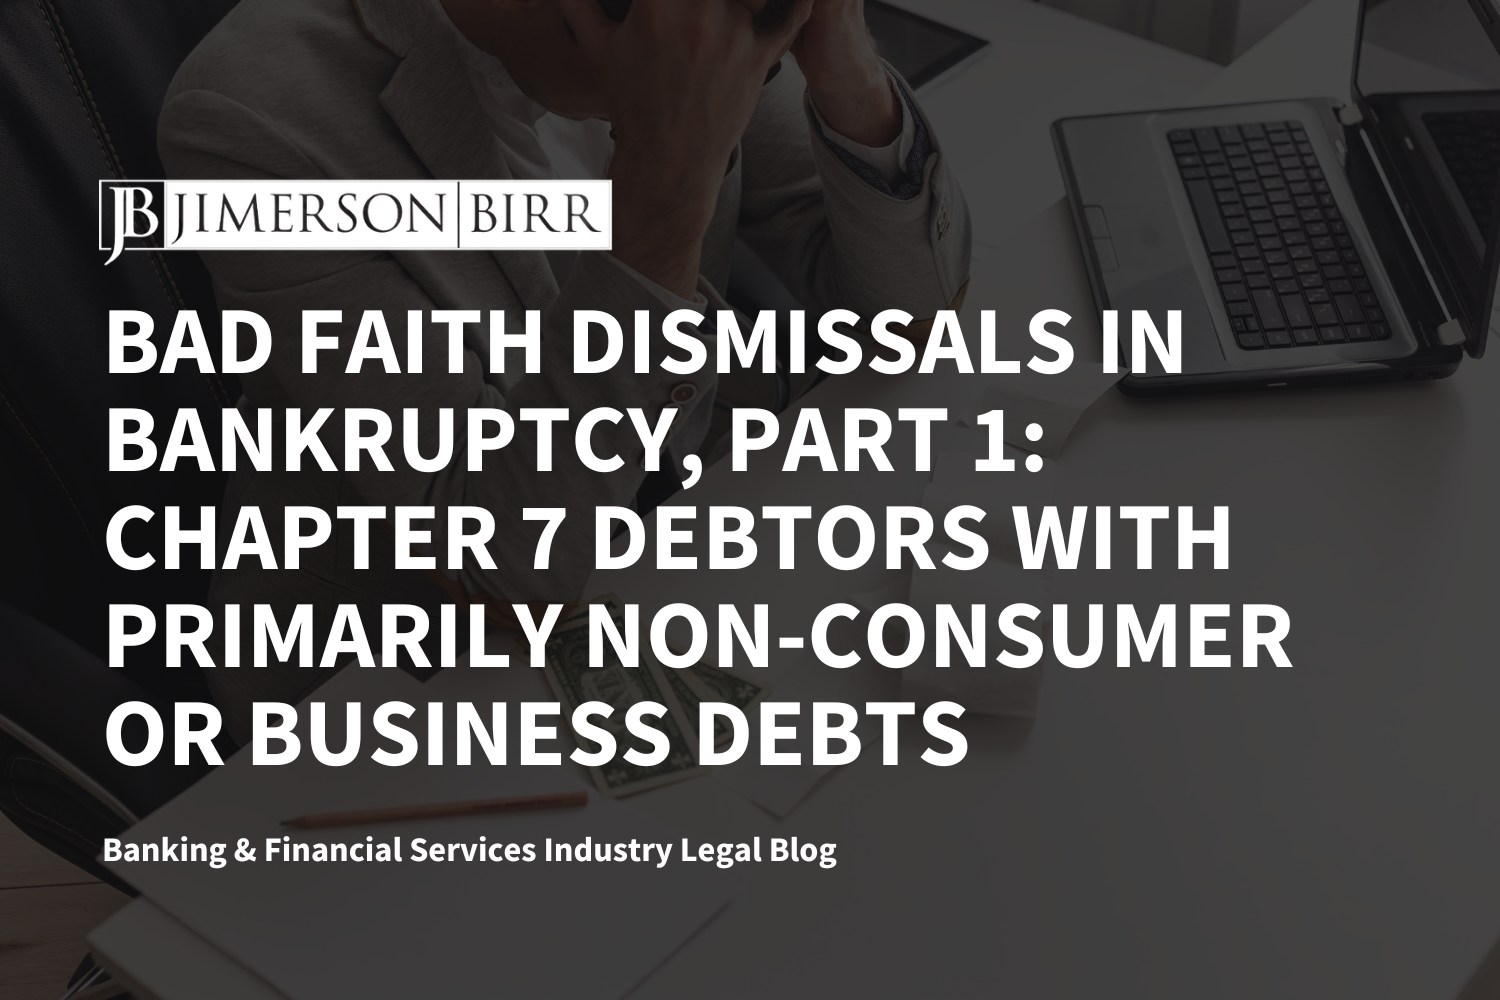 Bad Faith Dismissals in Bankruptcy, Part 1: Chapter 7 Debtors with Primarily Non-Consumer or Business Debts